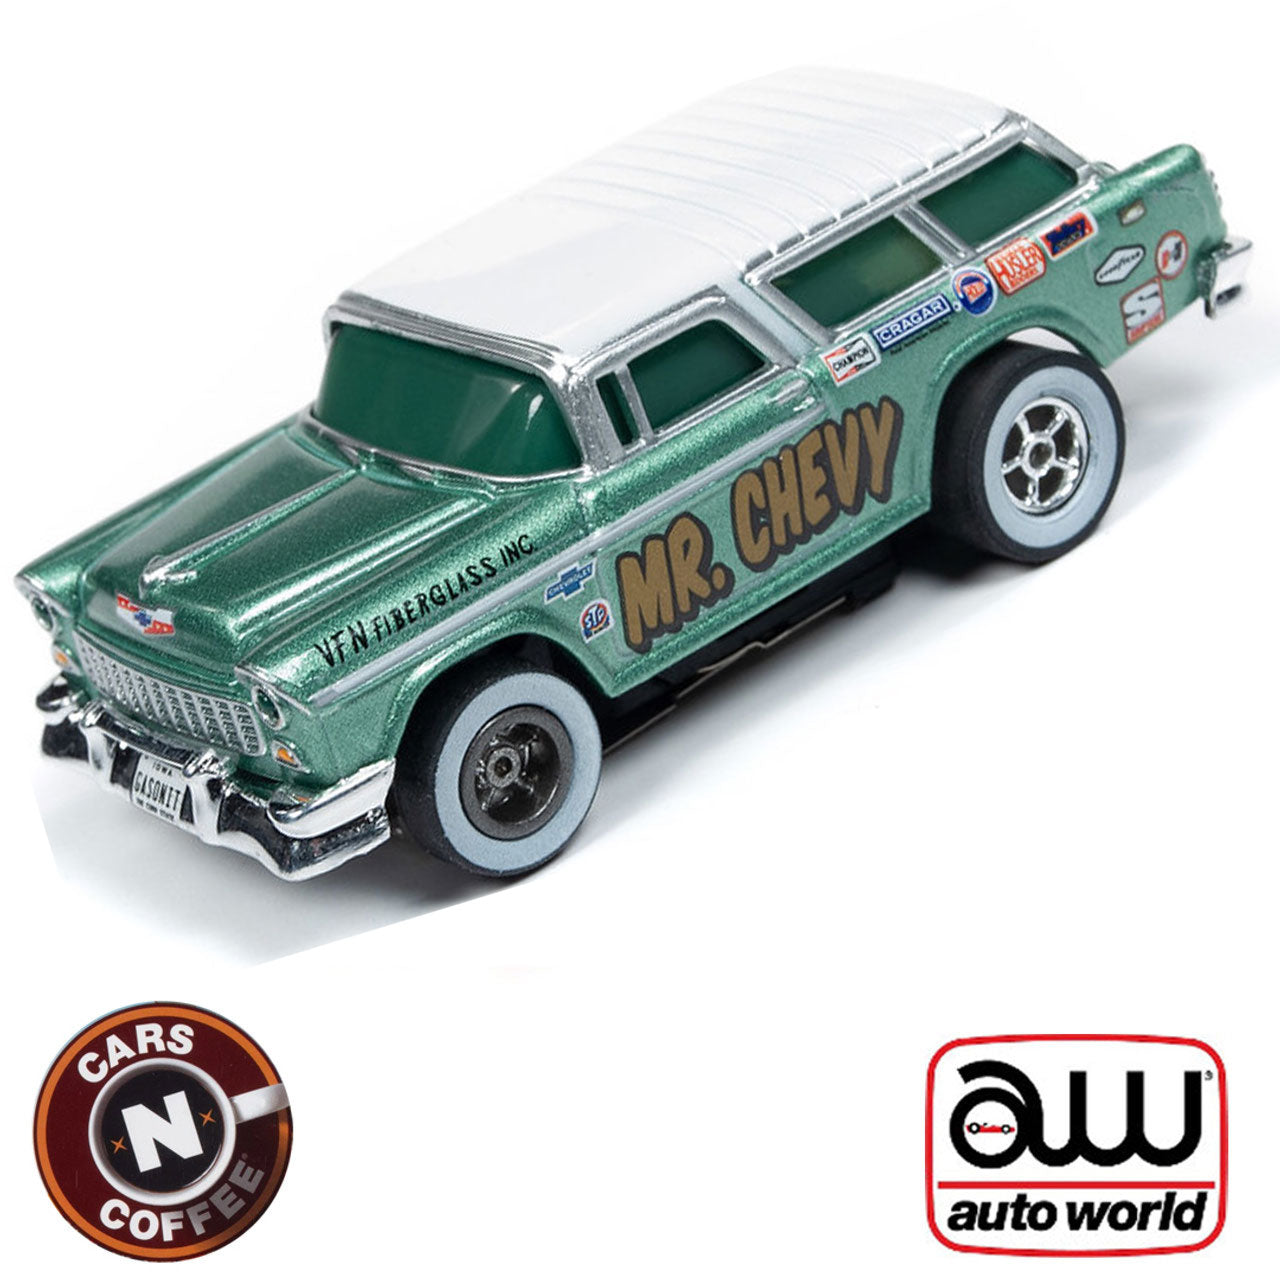 Auto World 1955 Chevy Nomad Mr. Chevy Xtraction R26 HO Slot Car SC341 for AFX